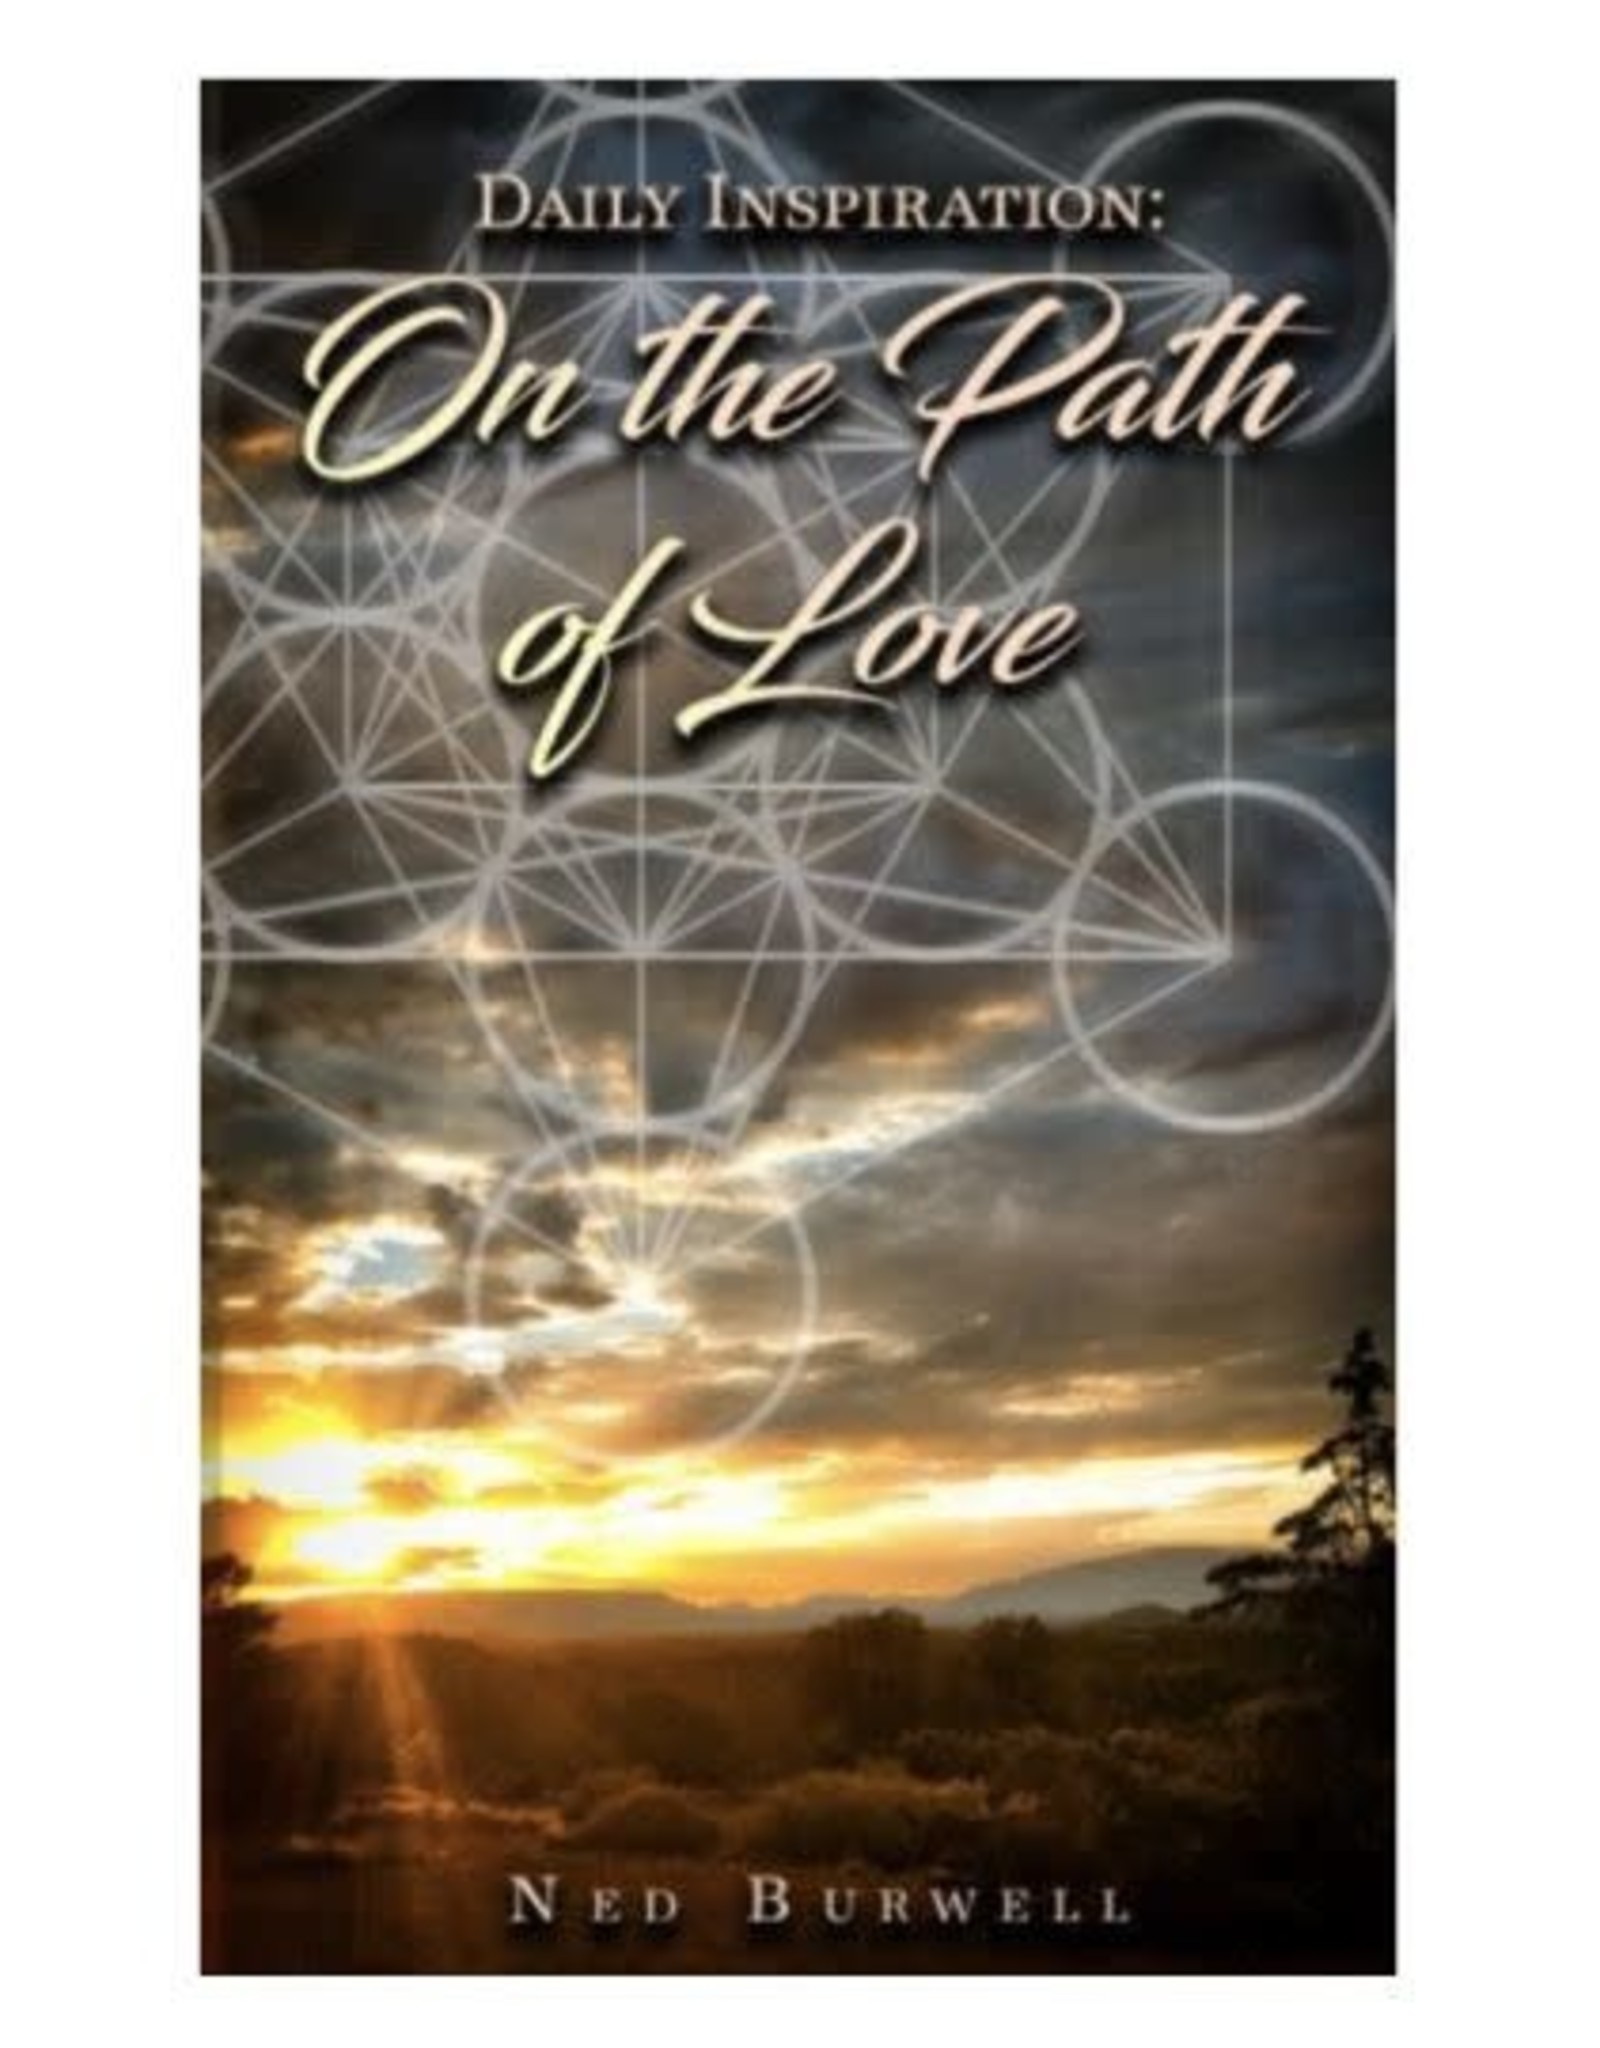 On the Path of Love Daily Inspirations by Ned Burwell